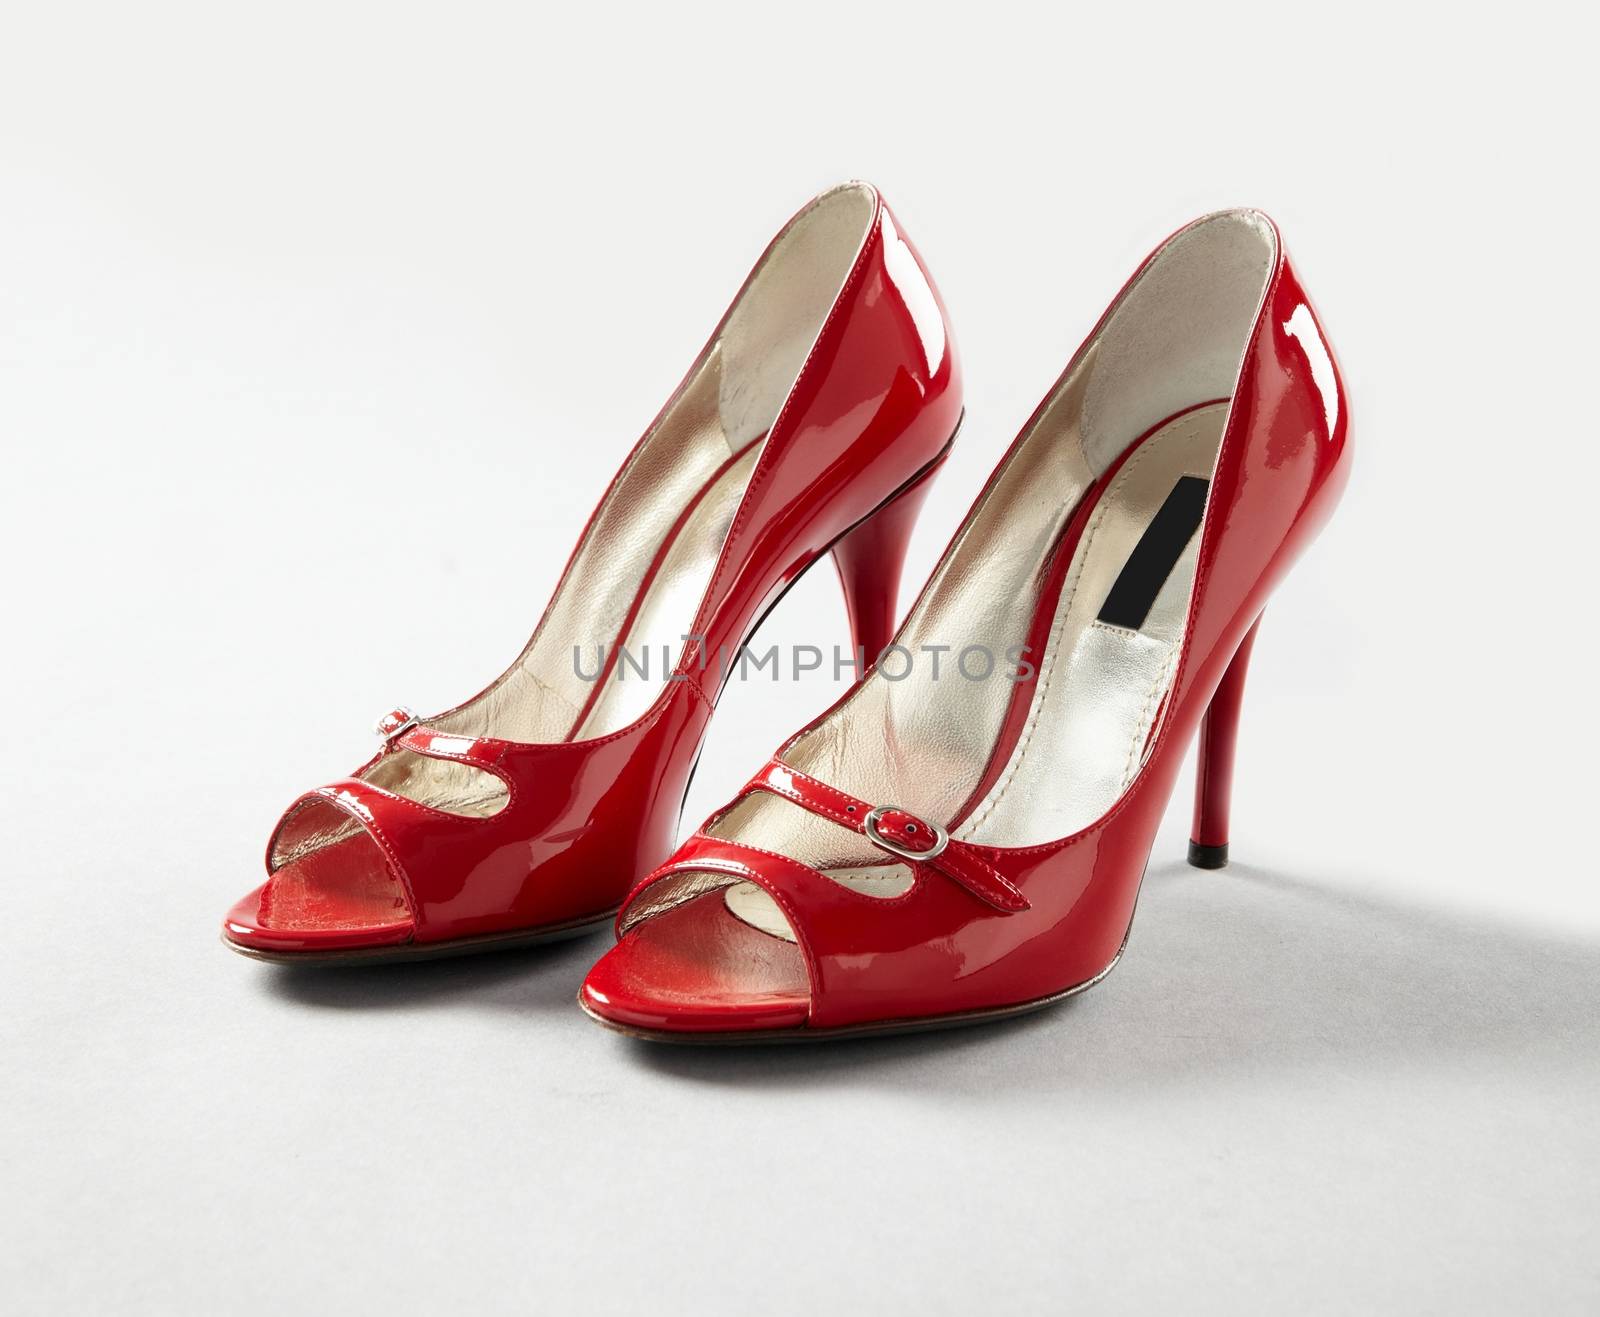 Pair of Glossy High Heels Shoes on white background